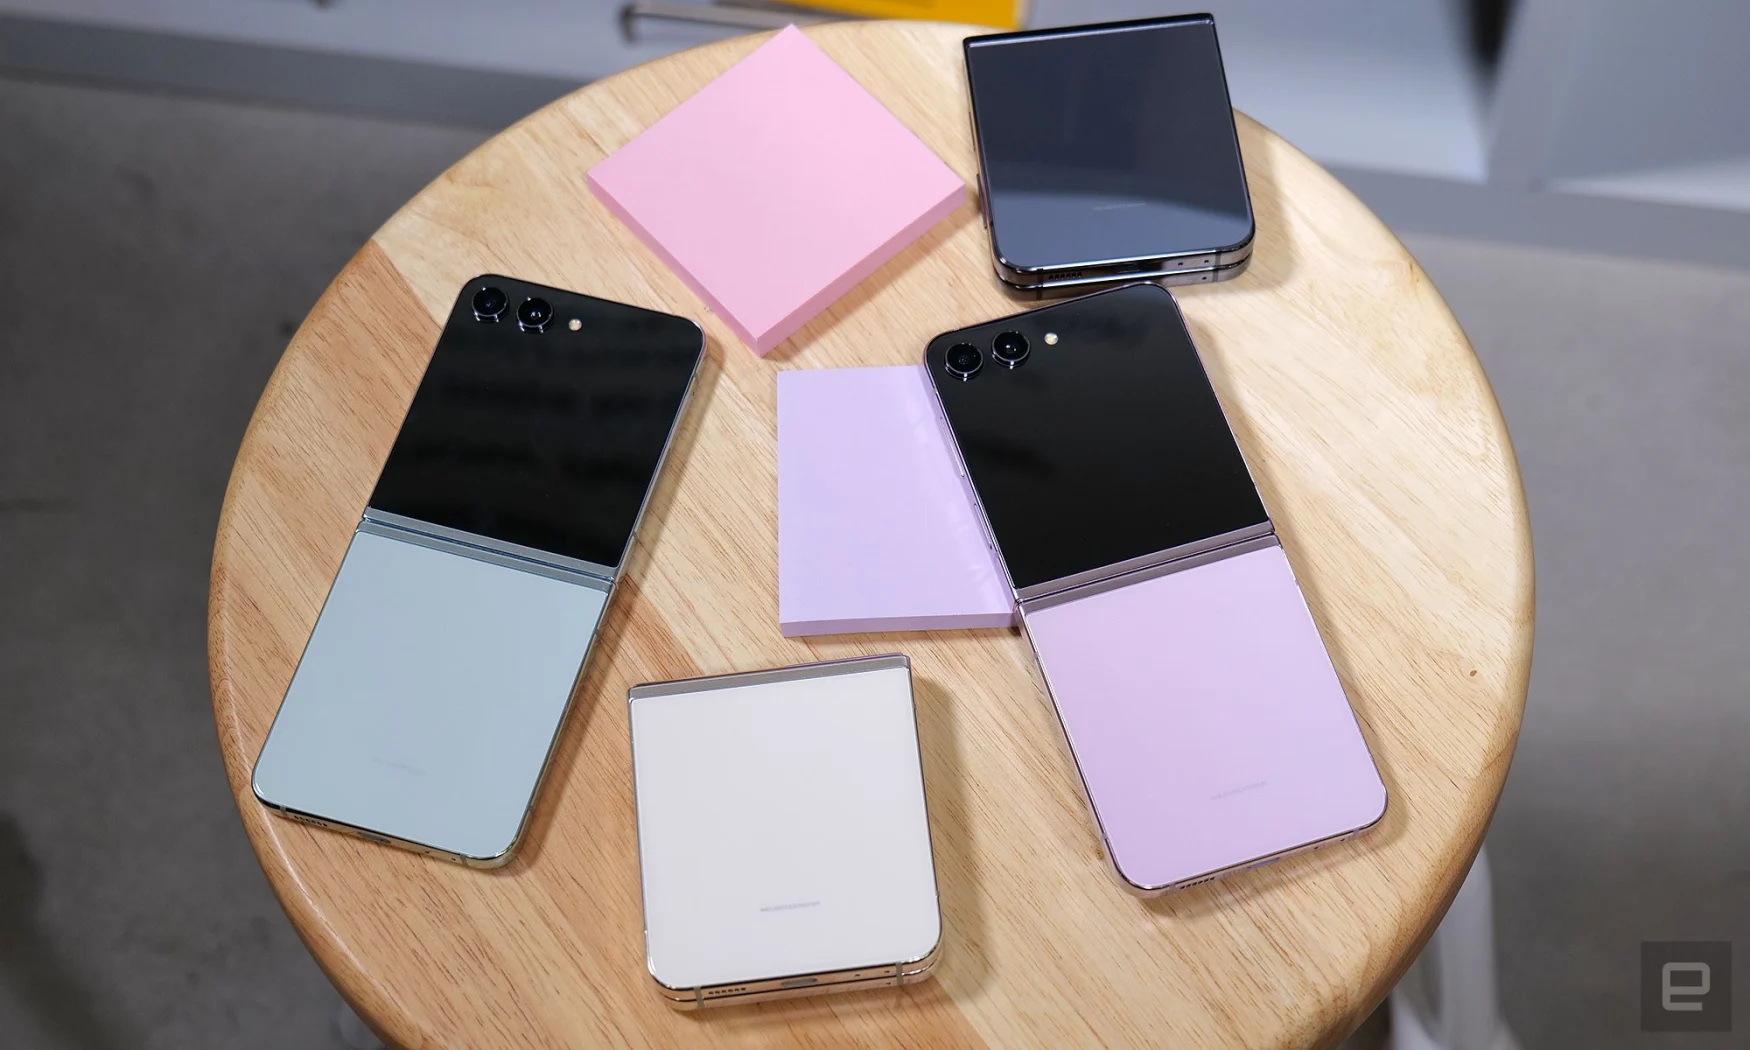 Four Samsung Galaxy Z Flip 5 units in graphite, lavender, cream and mint, laid out on a wooden stool. Two stick-it notepads are also on the surface.